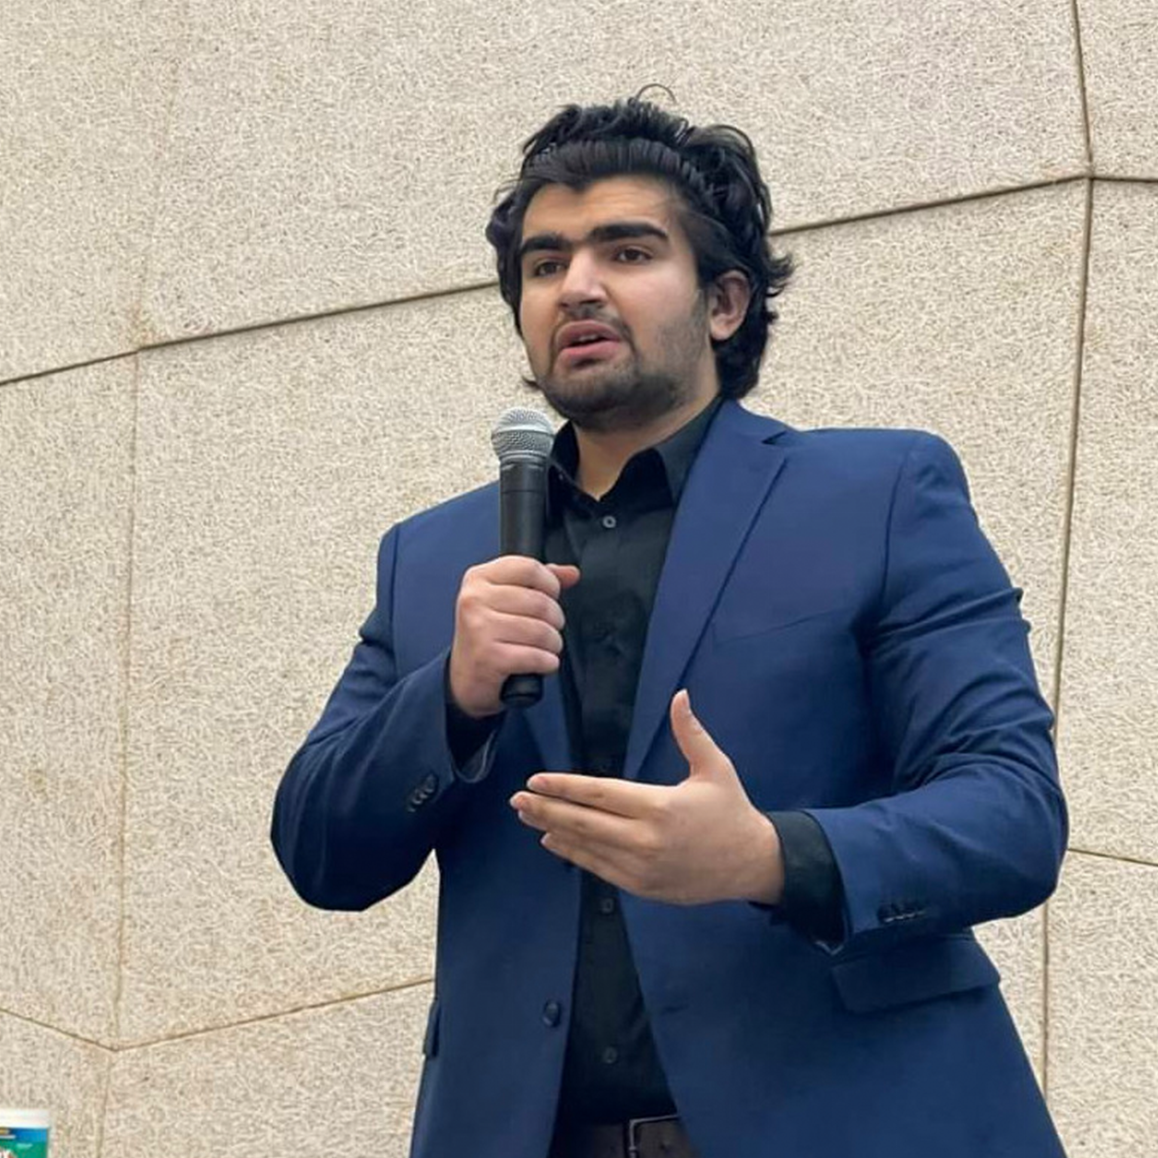 Ahmad wearing a blue suit and black shirt, speaking into a microphone